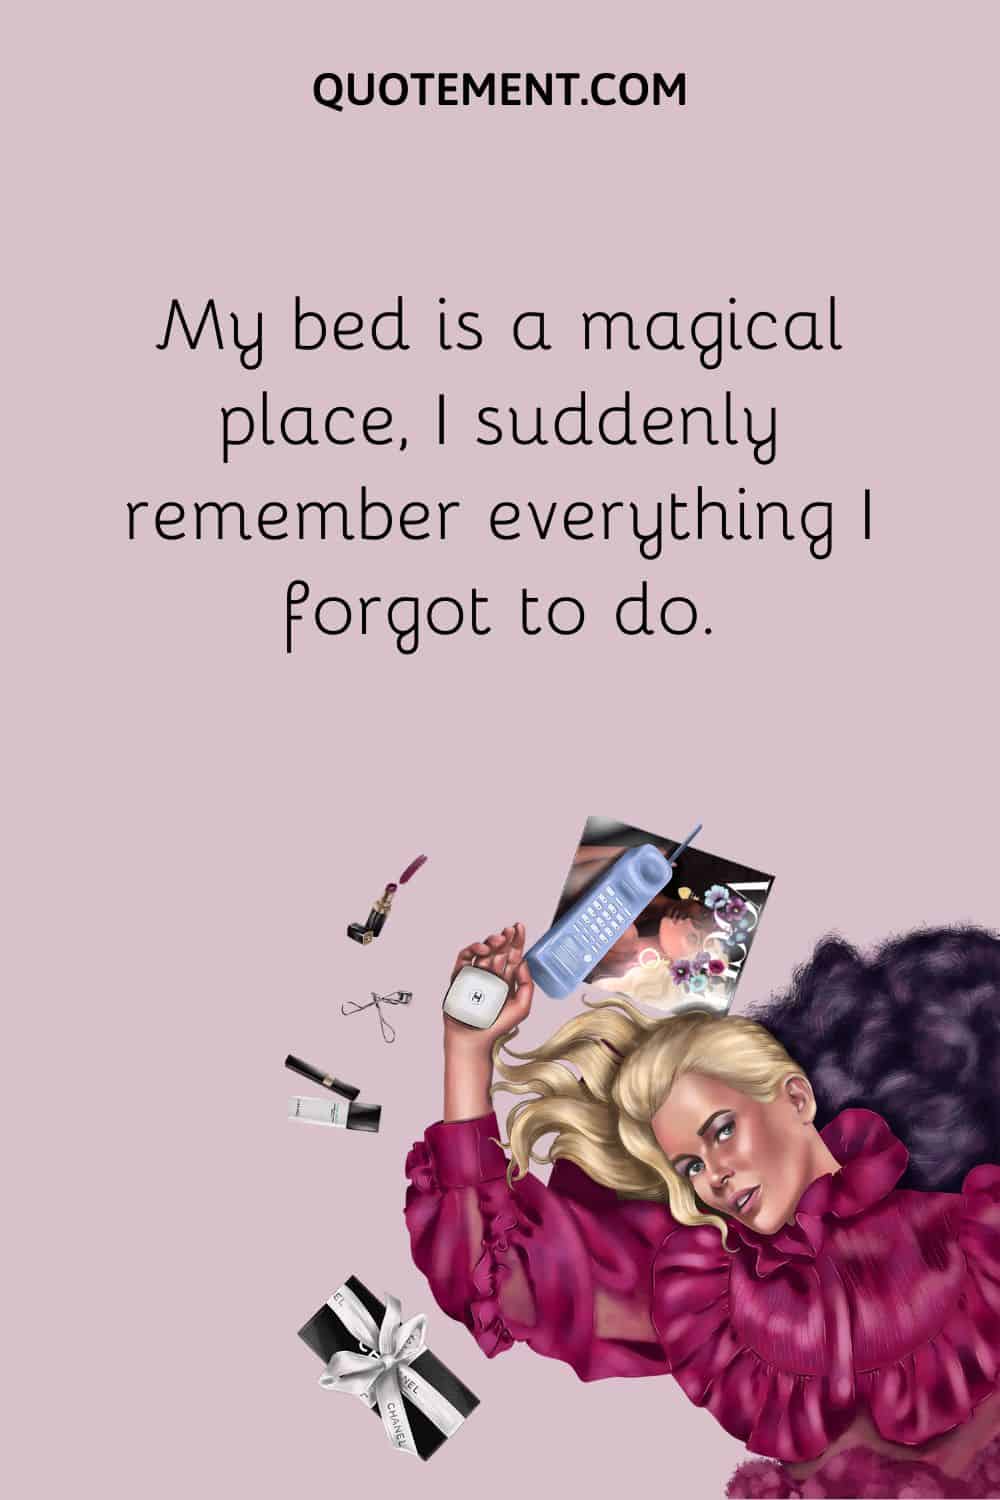 My bed is a magical place